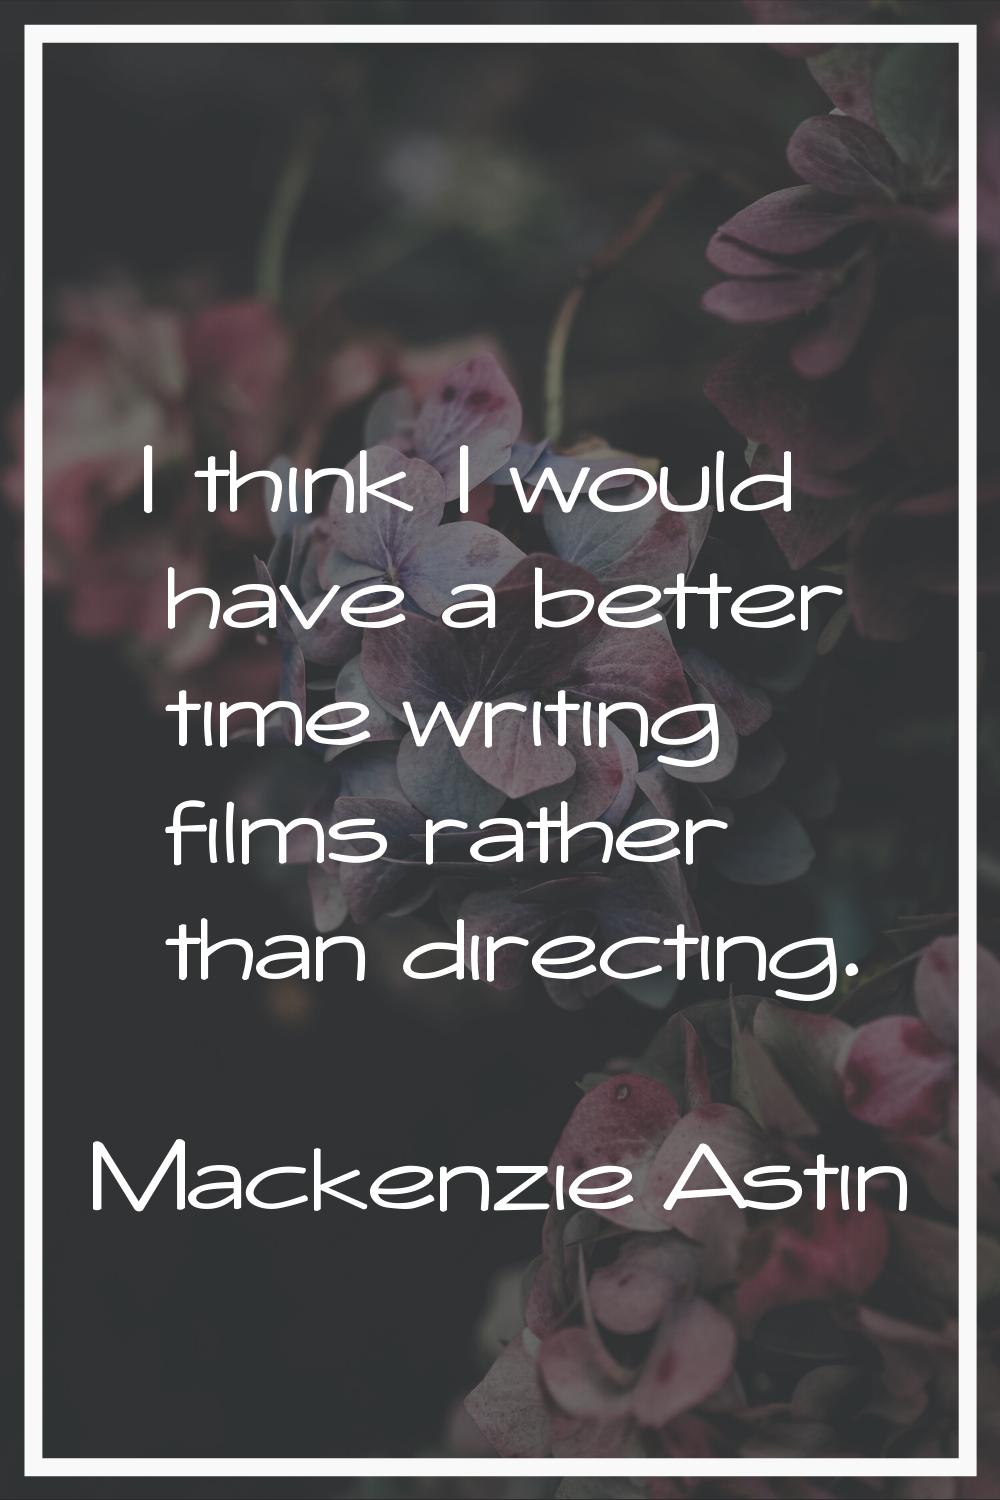 I think I would have a better time writing films rather than directing.